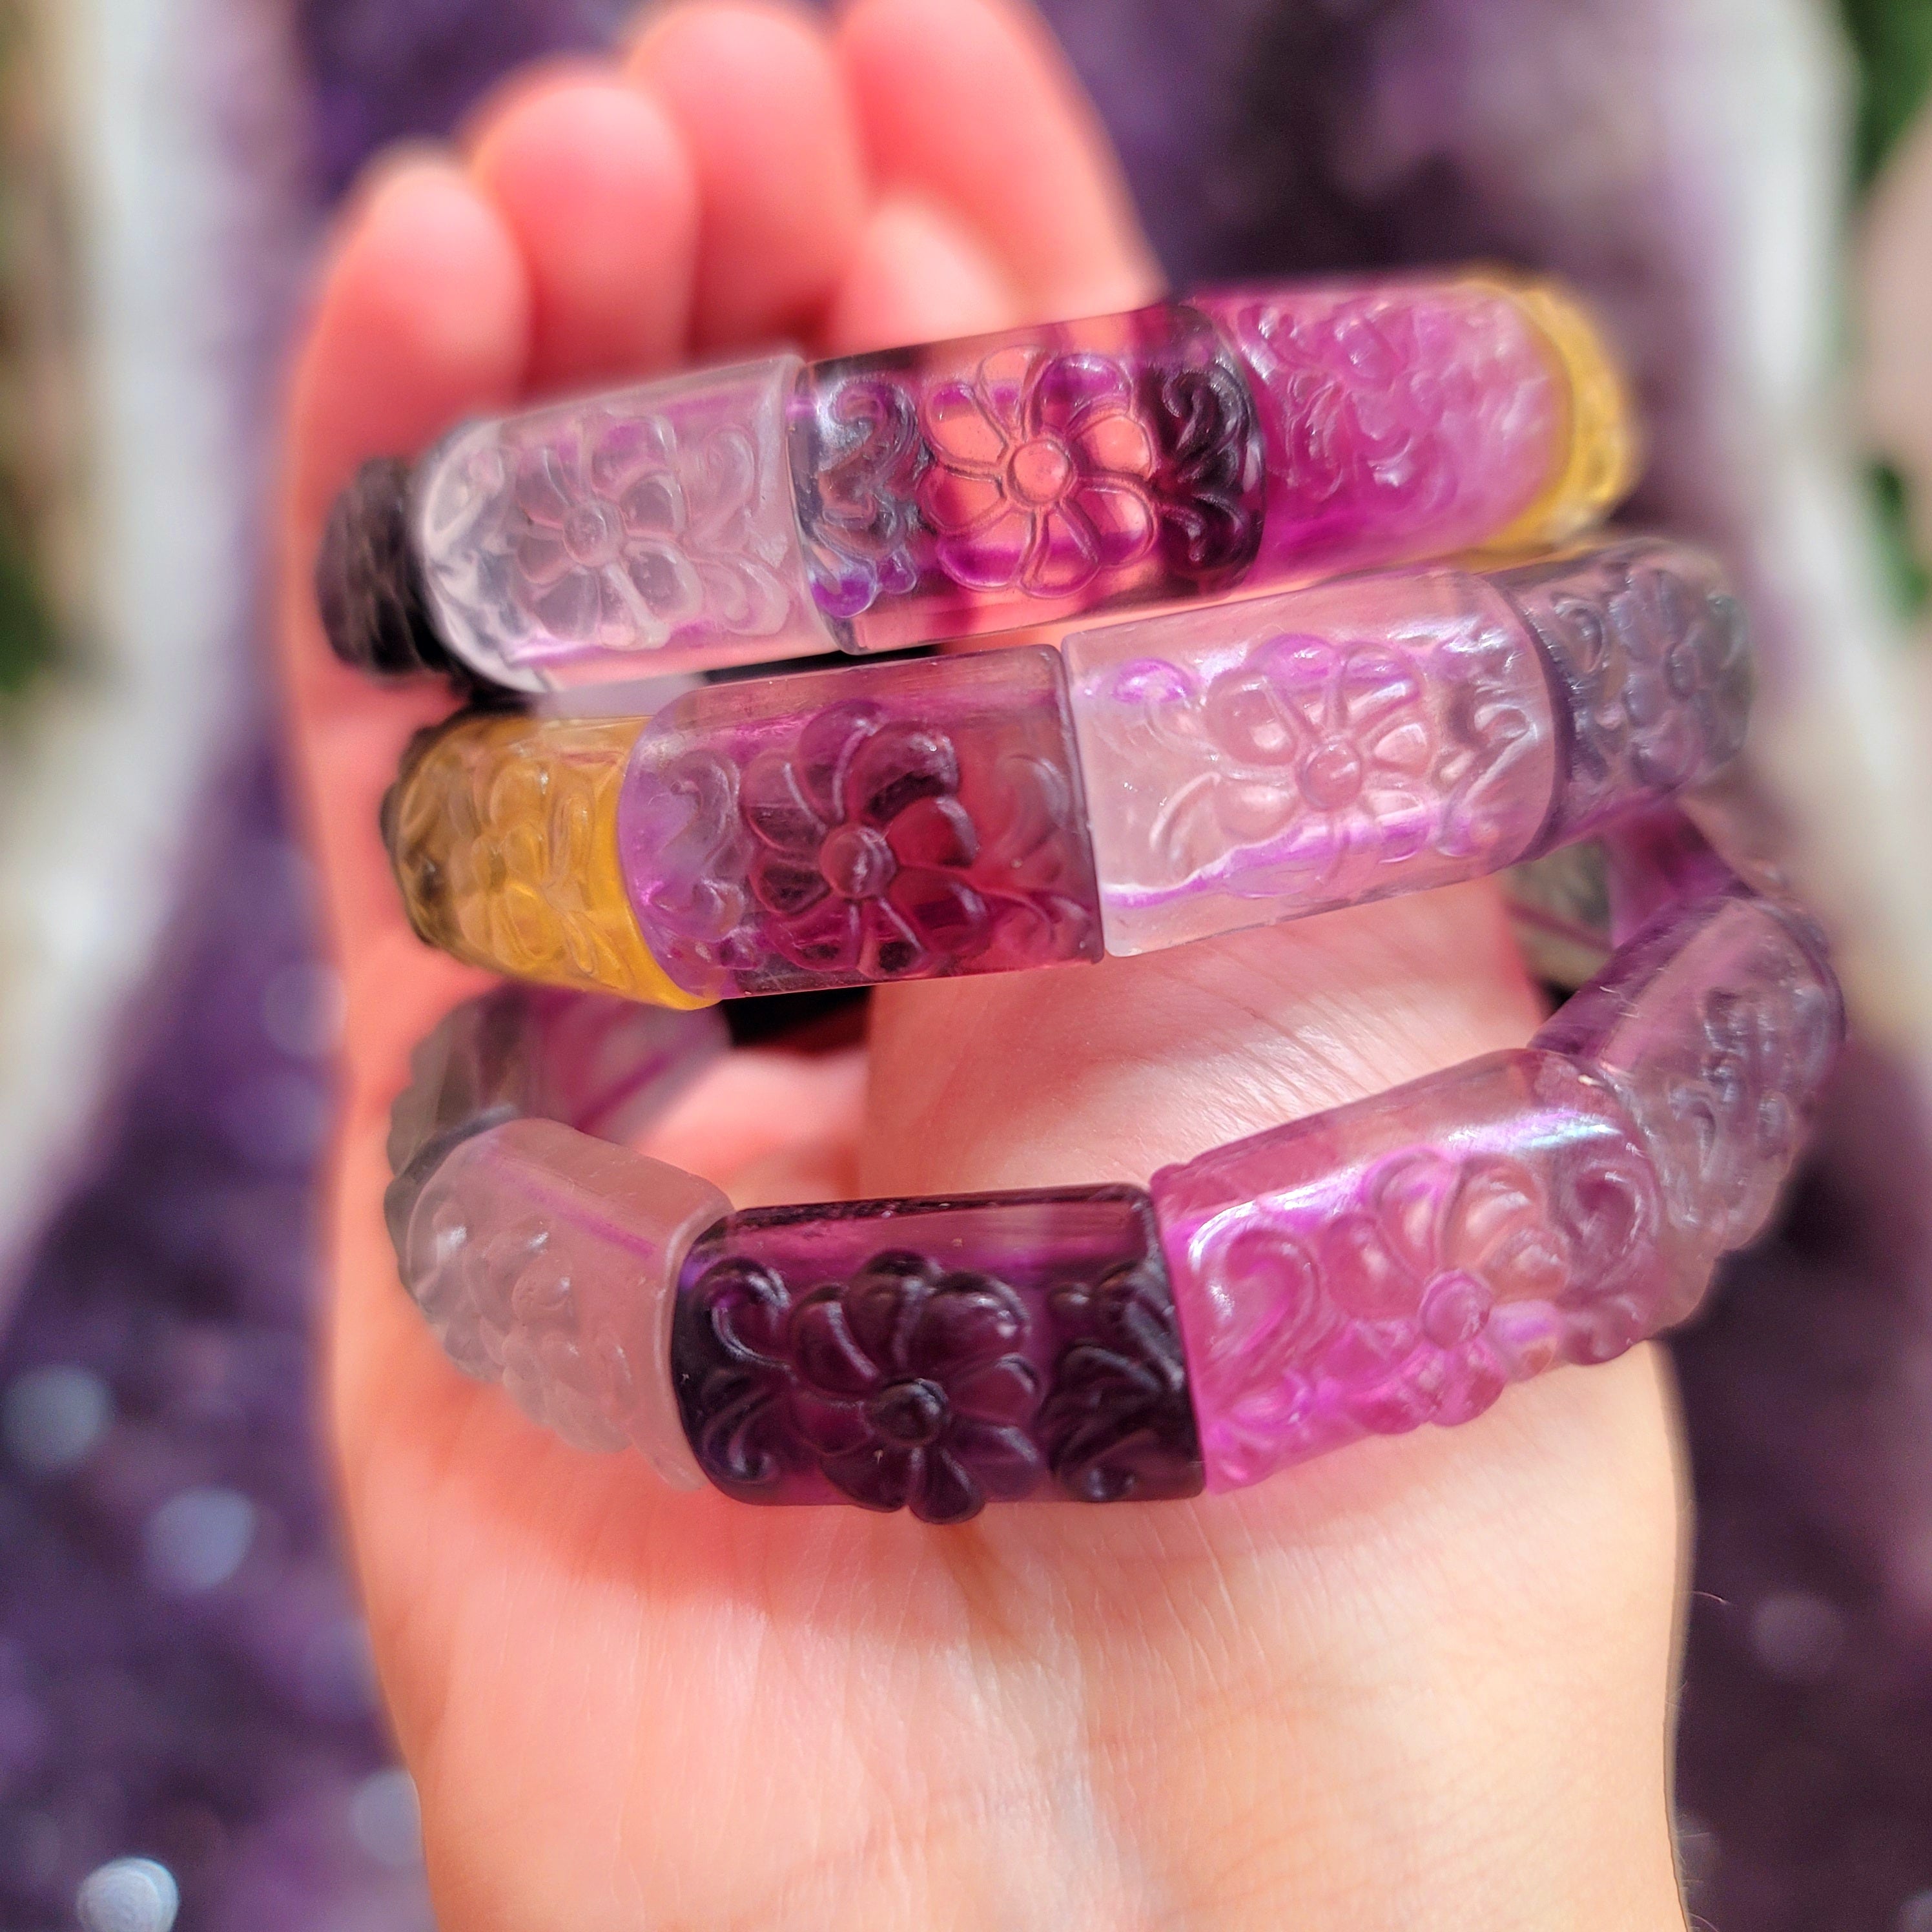 Rainbow Fluorite Stretchy Bangle Bracelet for Clarity, Focus and Memorization